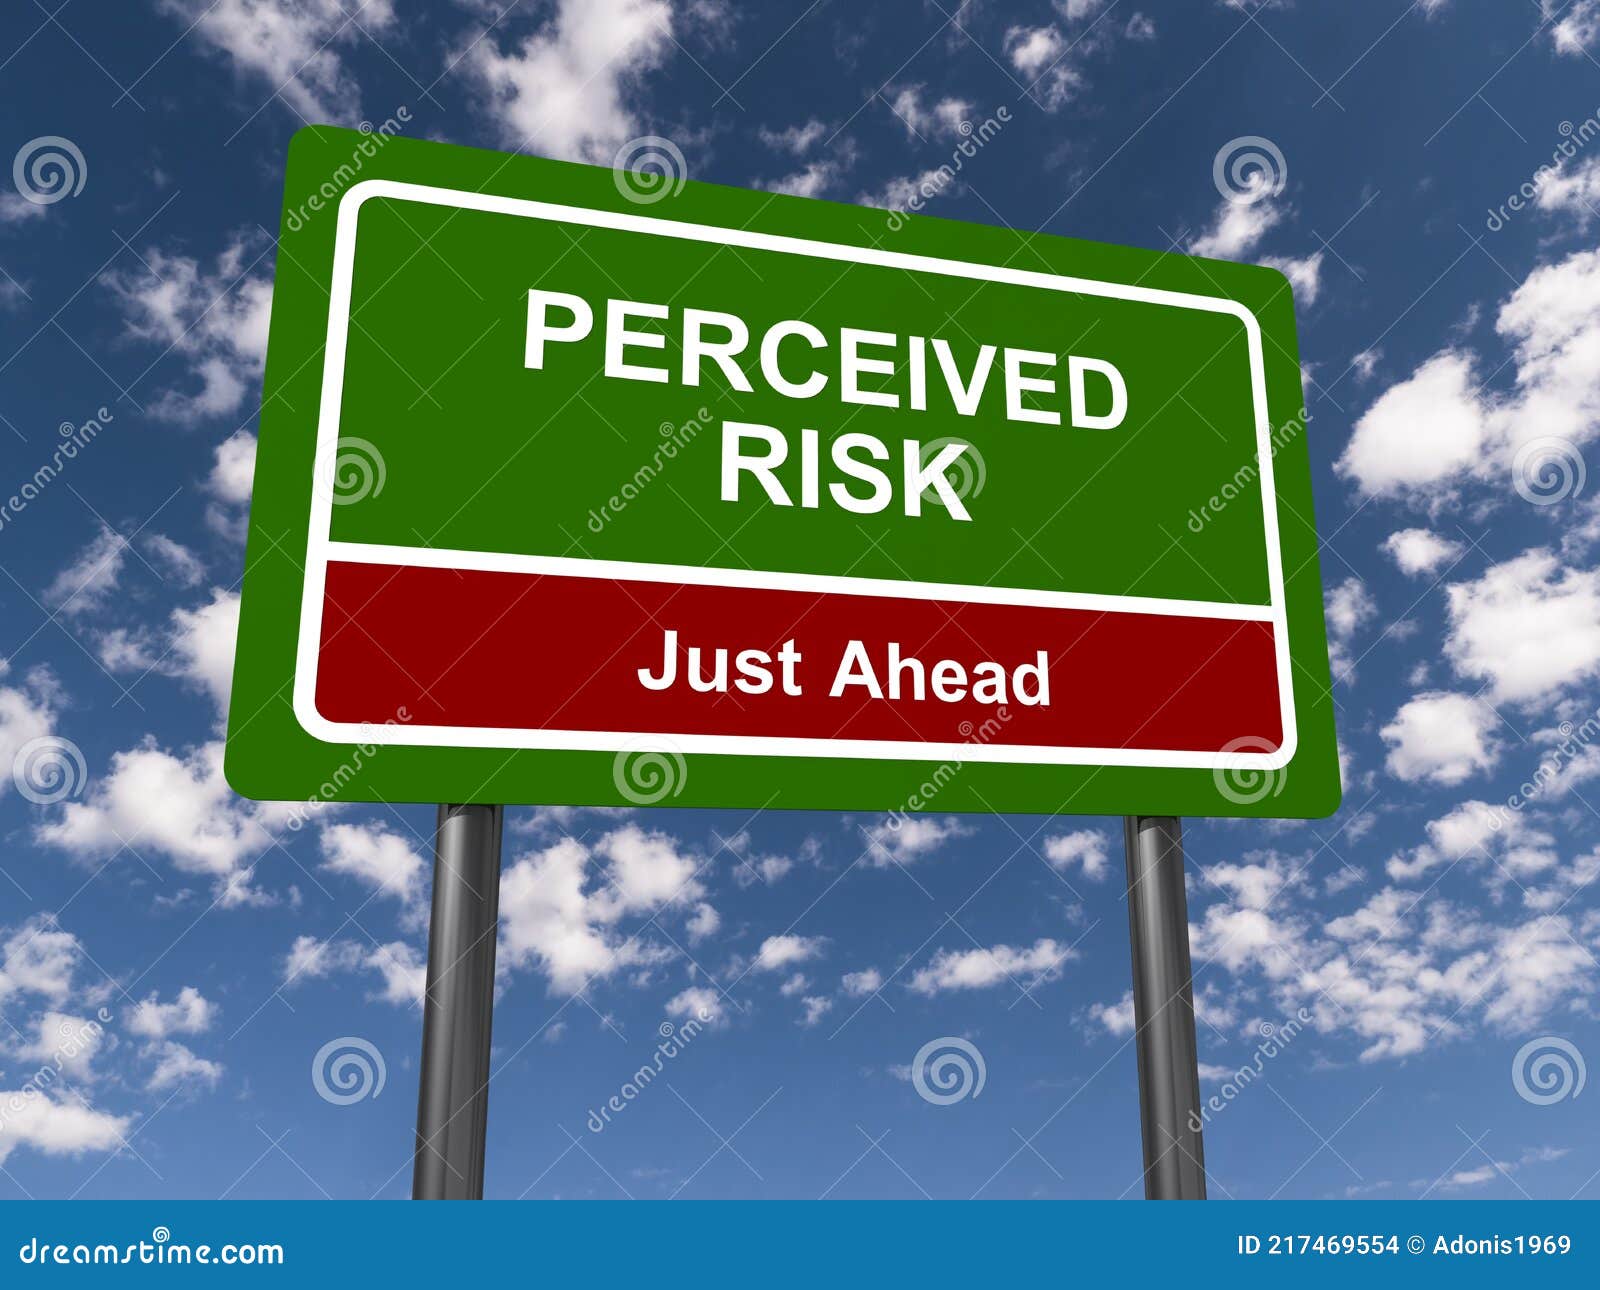 perceived risk traffic sign